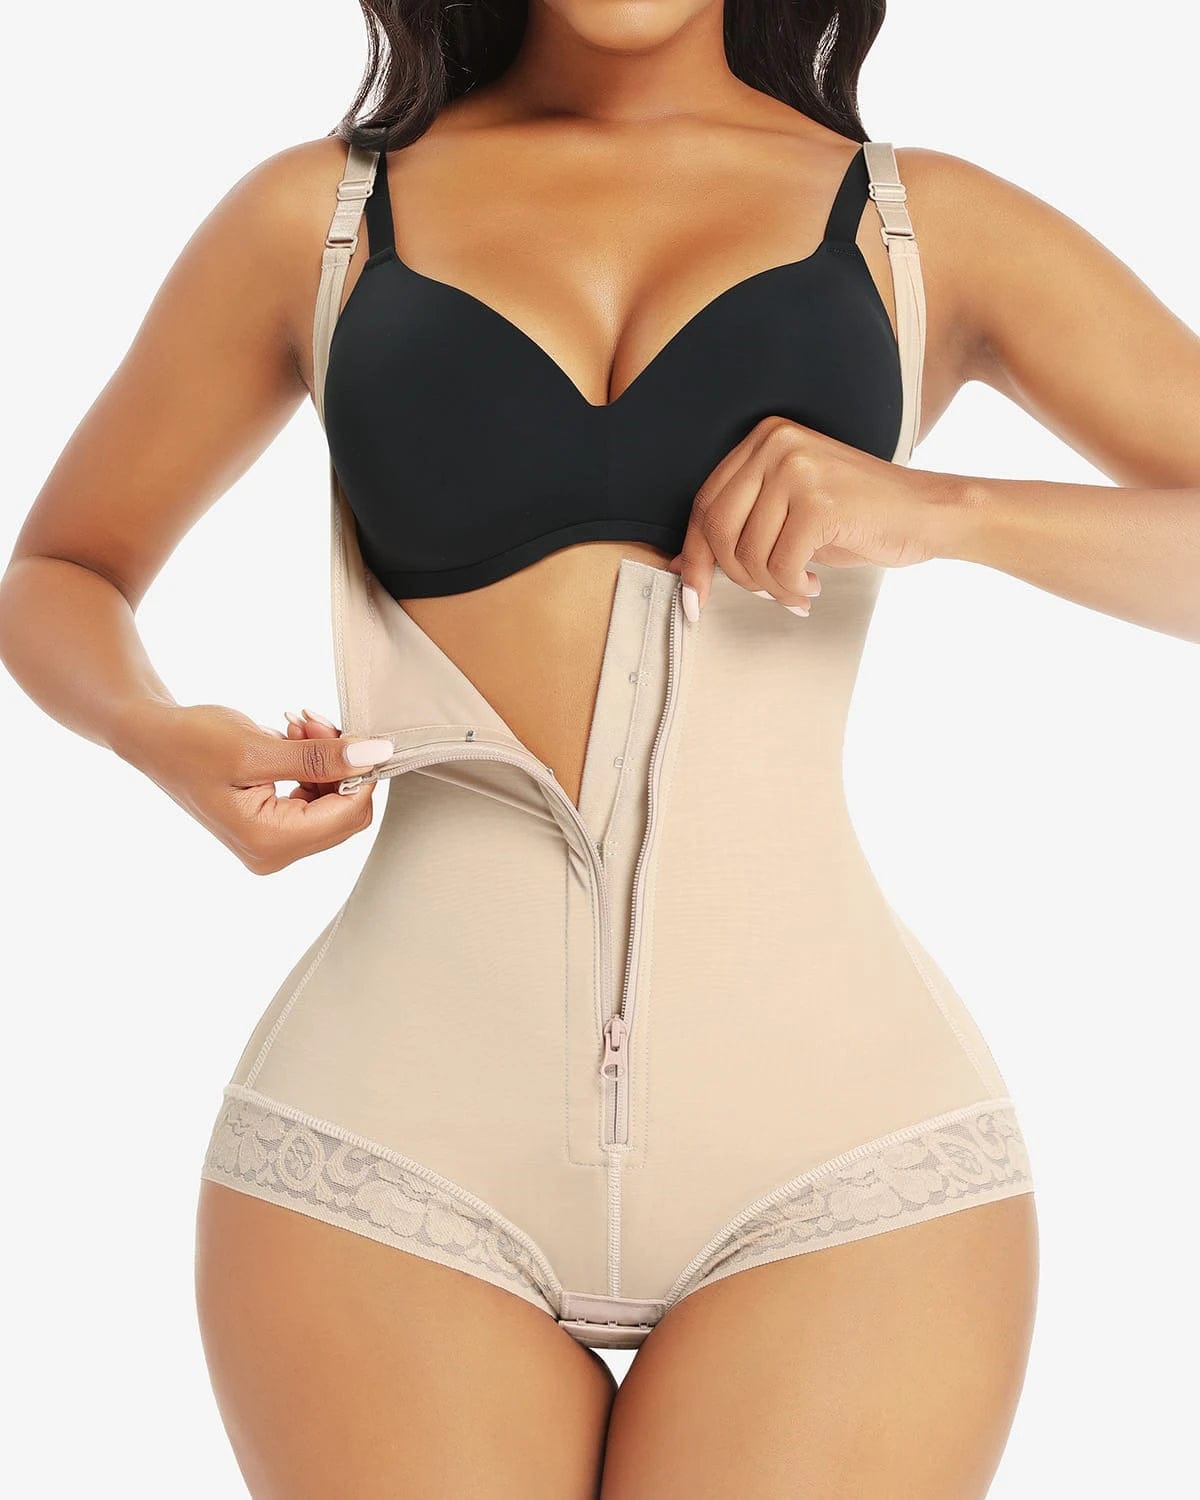 AirSlim® Backless Underwear Thong Shapewear Sexy babes don't miss this  style!!! Find this and many more products on our website